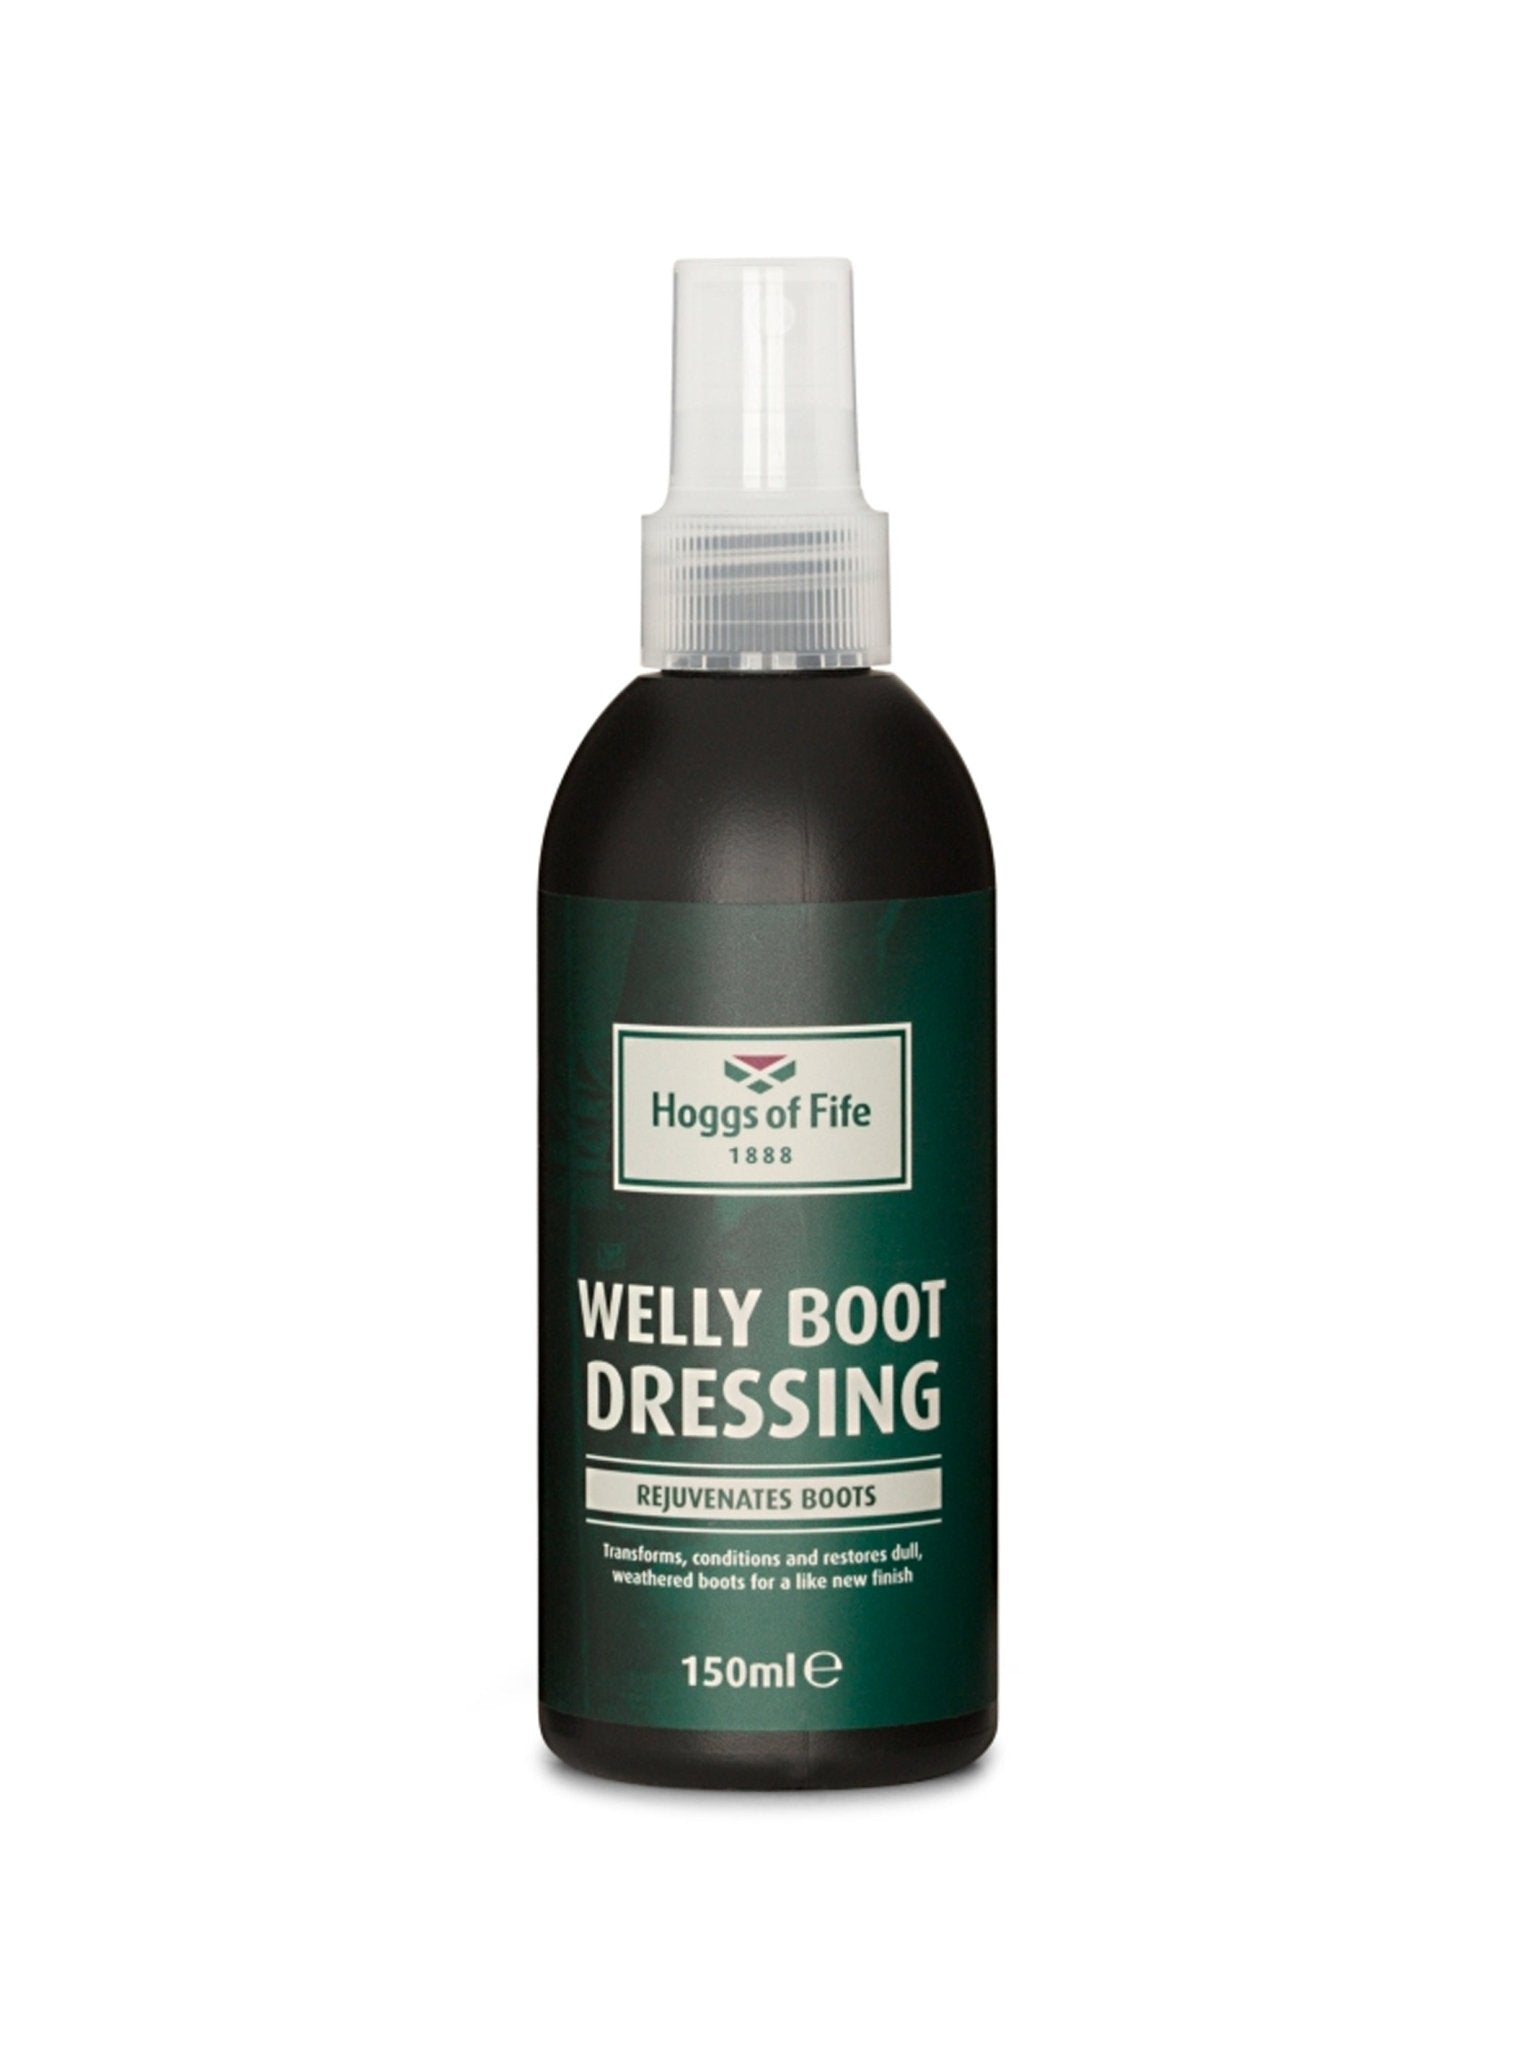 4elementsclothingHoggs of FifeHoggs of Fife - Wellington Boot / Rubber Boot Dressing 150ml protection solutionShoesWBOT/NE/1